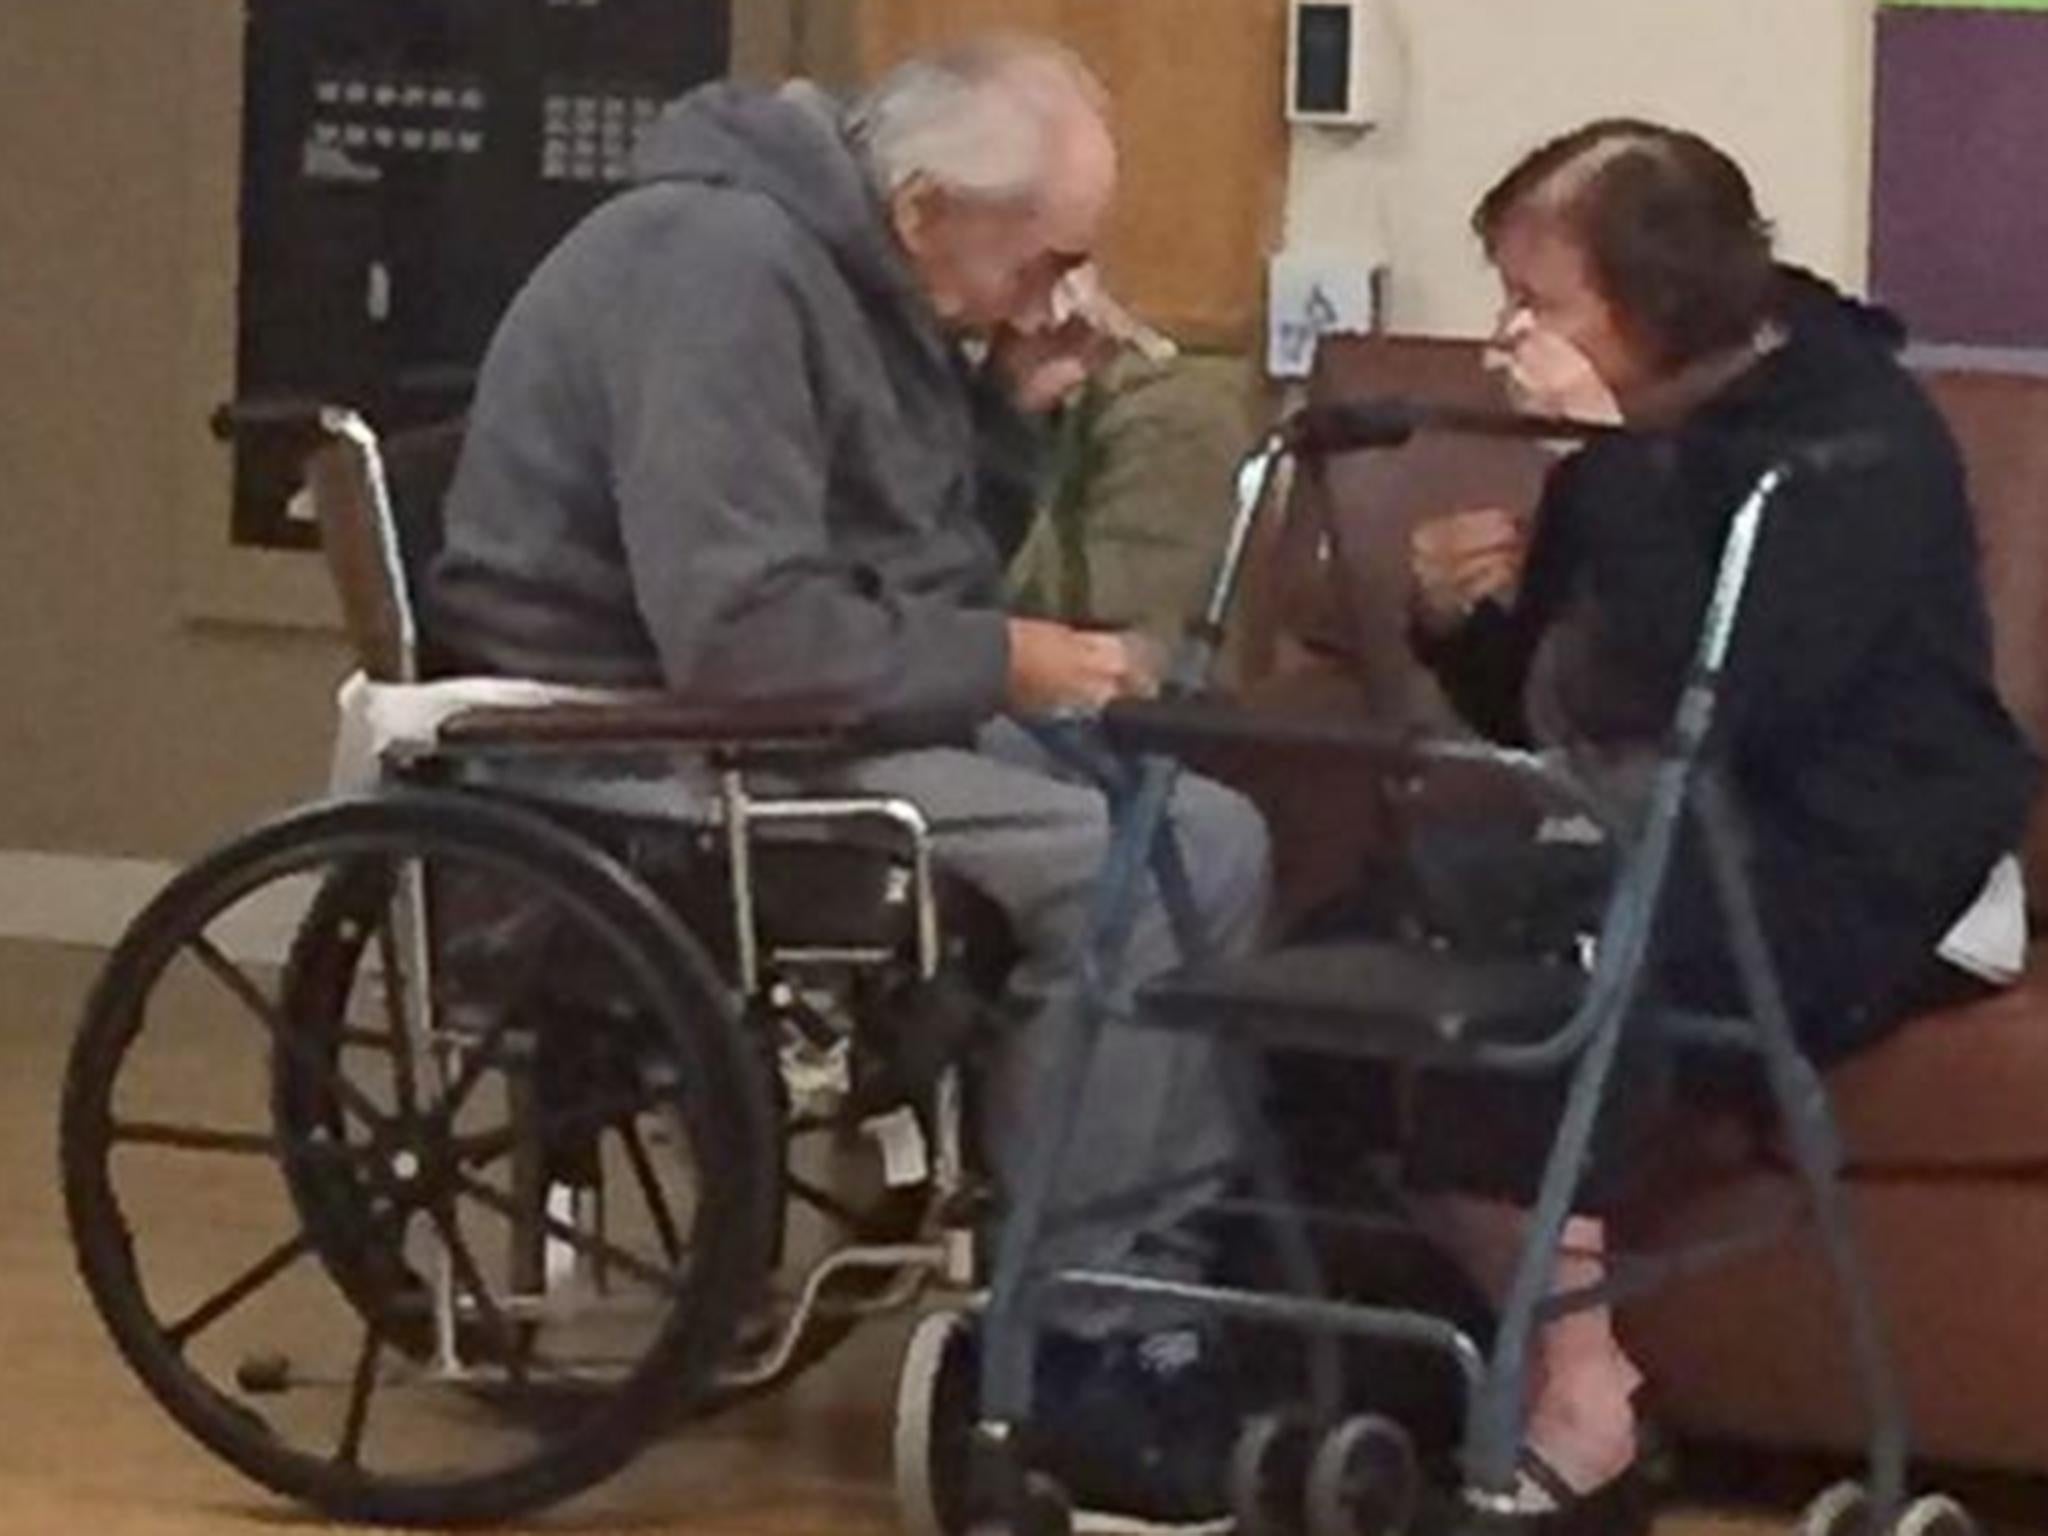 The couple burst into tears every time they visit each other